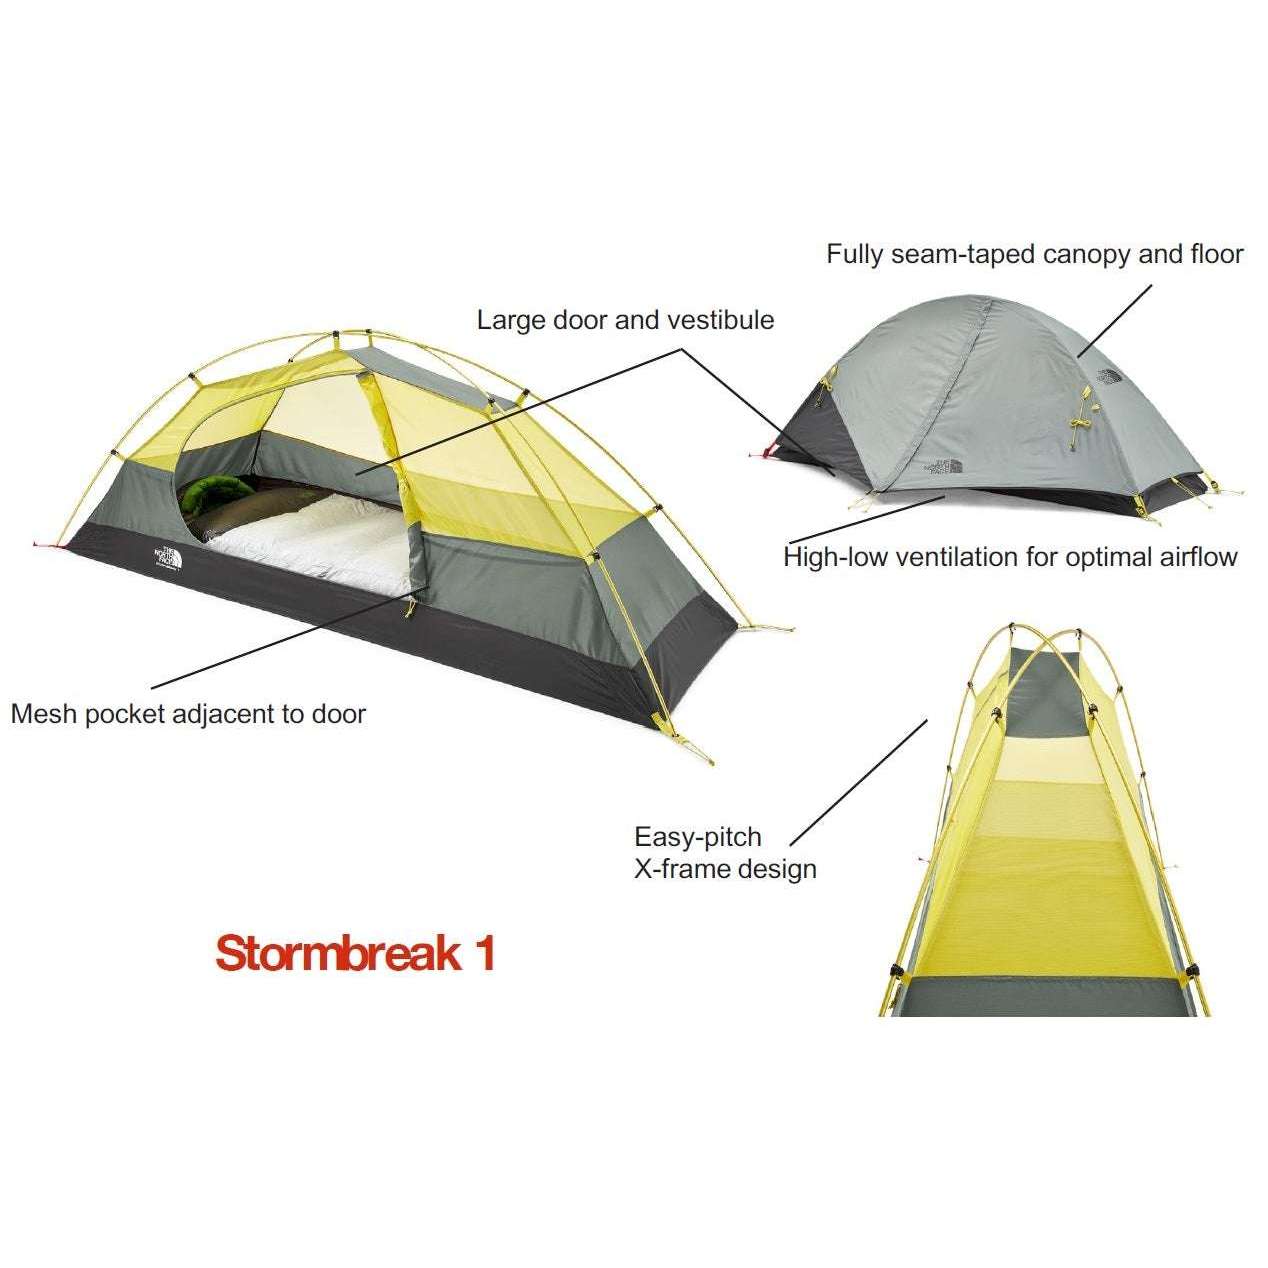 North Face Stormbreak 1 Tent (1 Person/3 Season) Updated – Gear Up For Outdoors